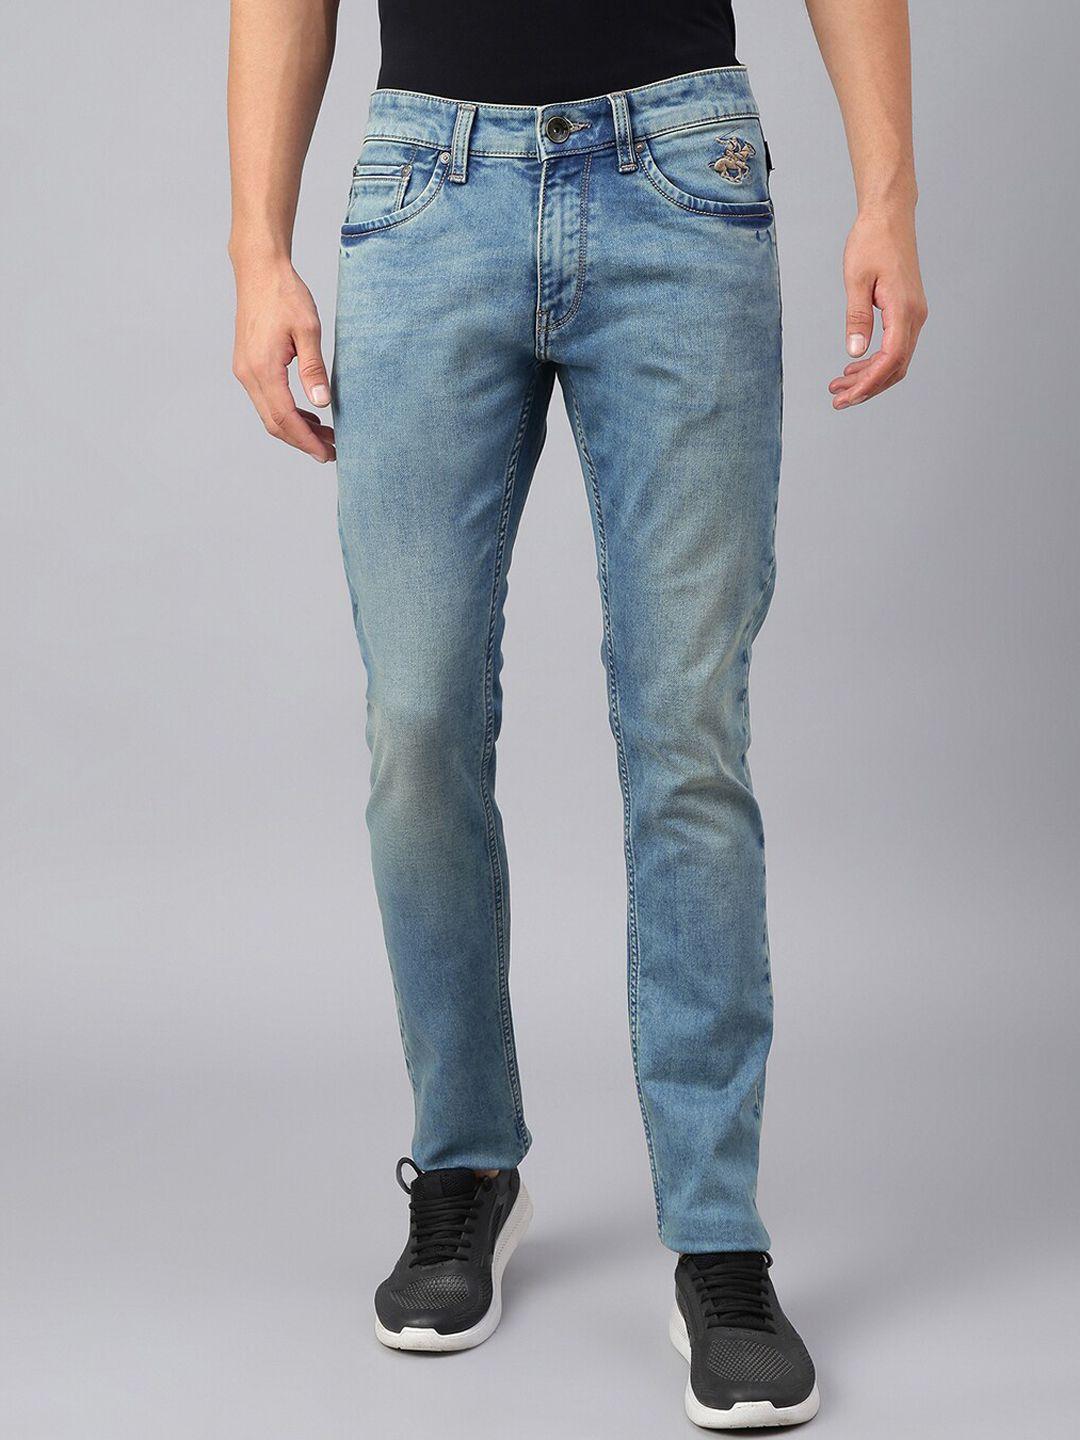 beverly hills polo club men skinny fit heavy fade jeans